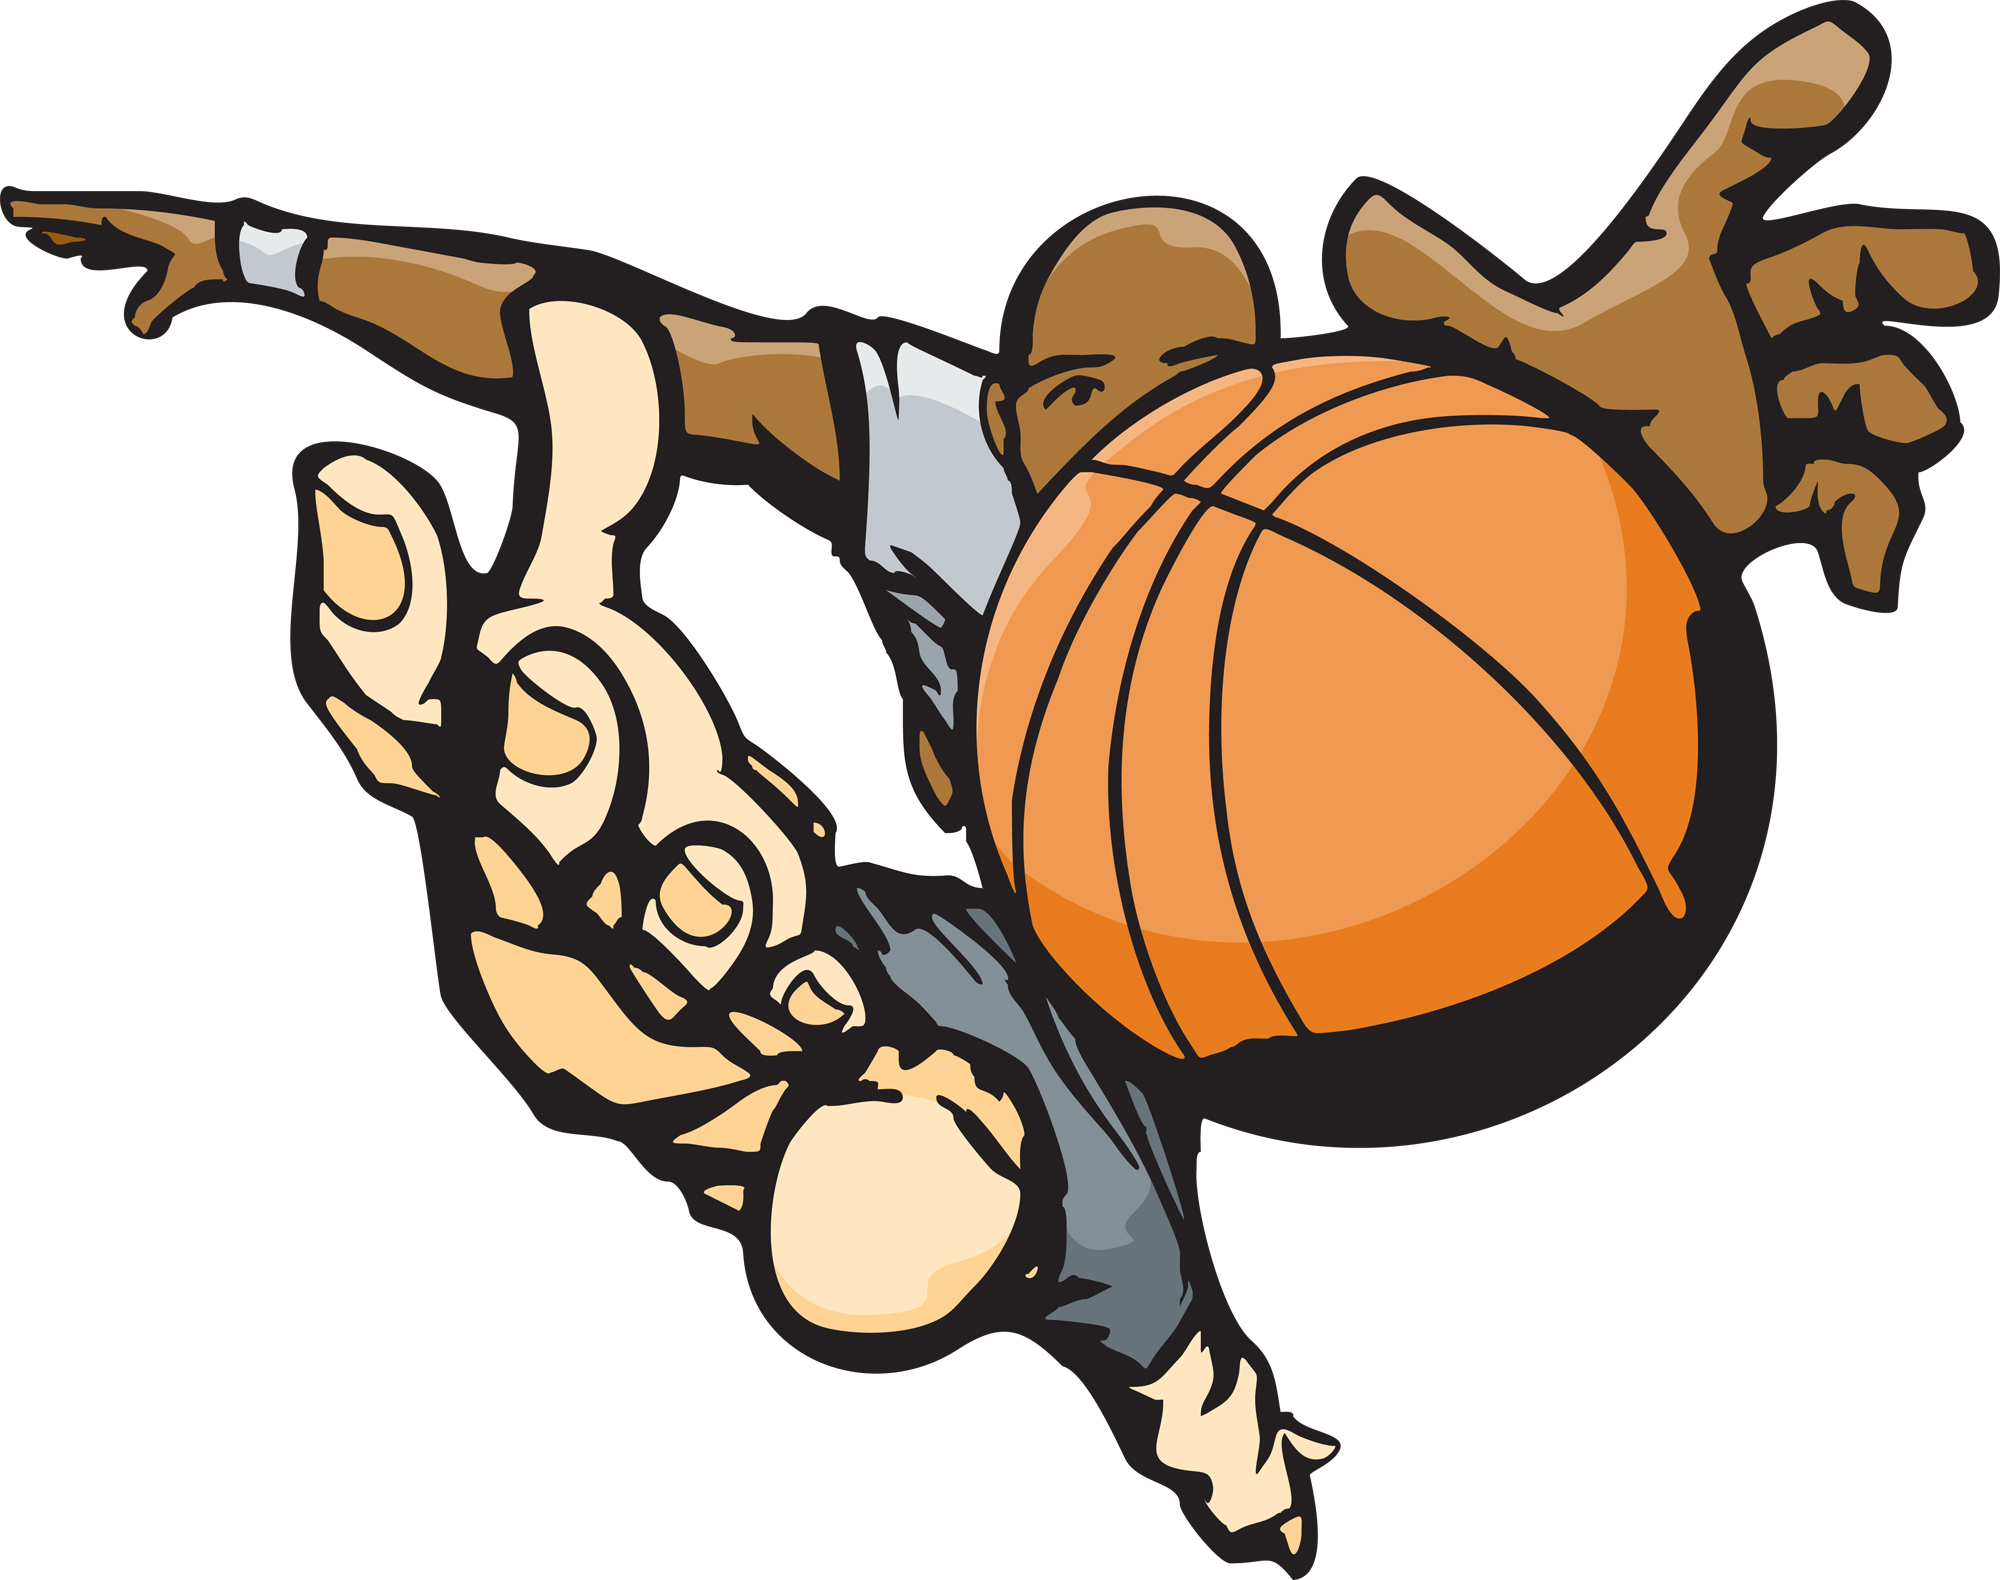 Free Basketball Images Image Hd Image Clipart